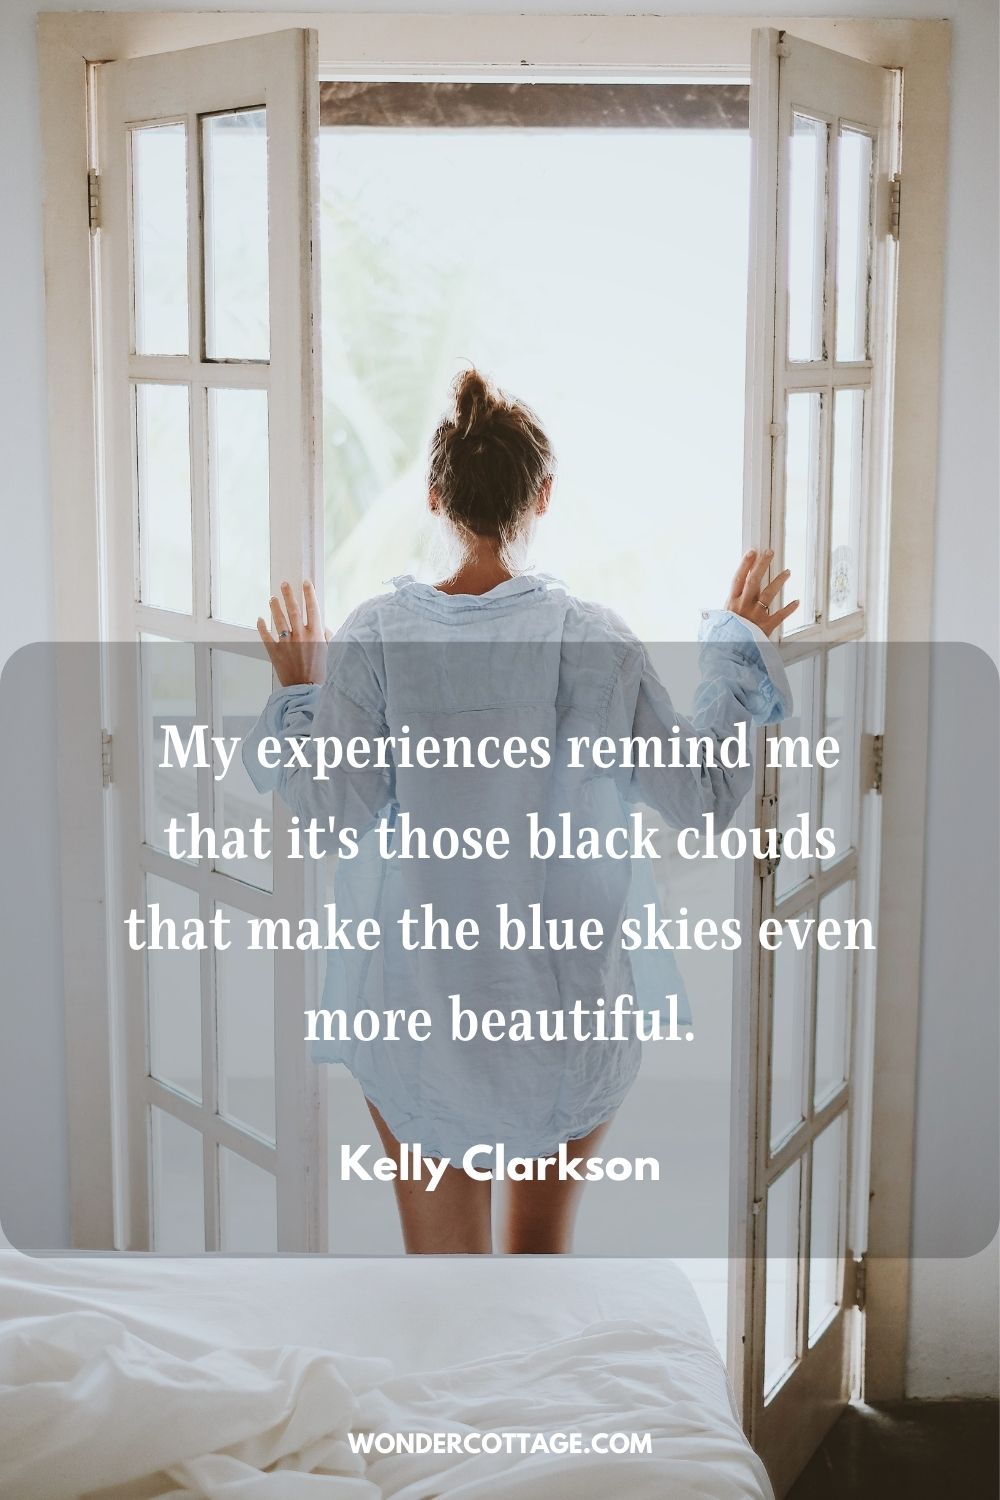 My experiences remind me that it's those black clouds that make the blue skies even more beautiful. Kelly Clarkson